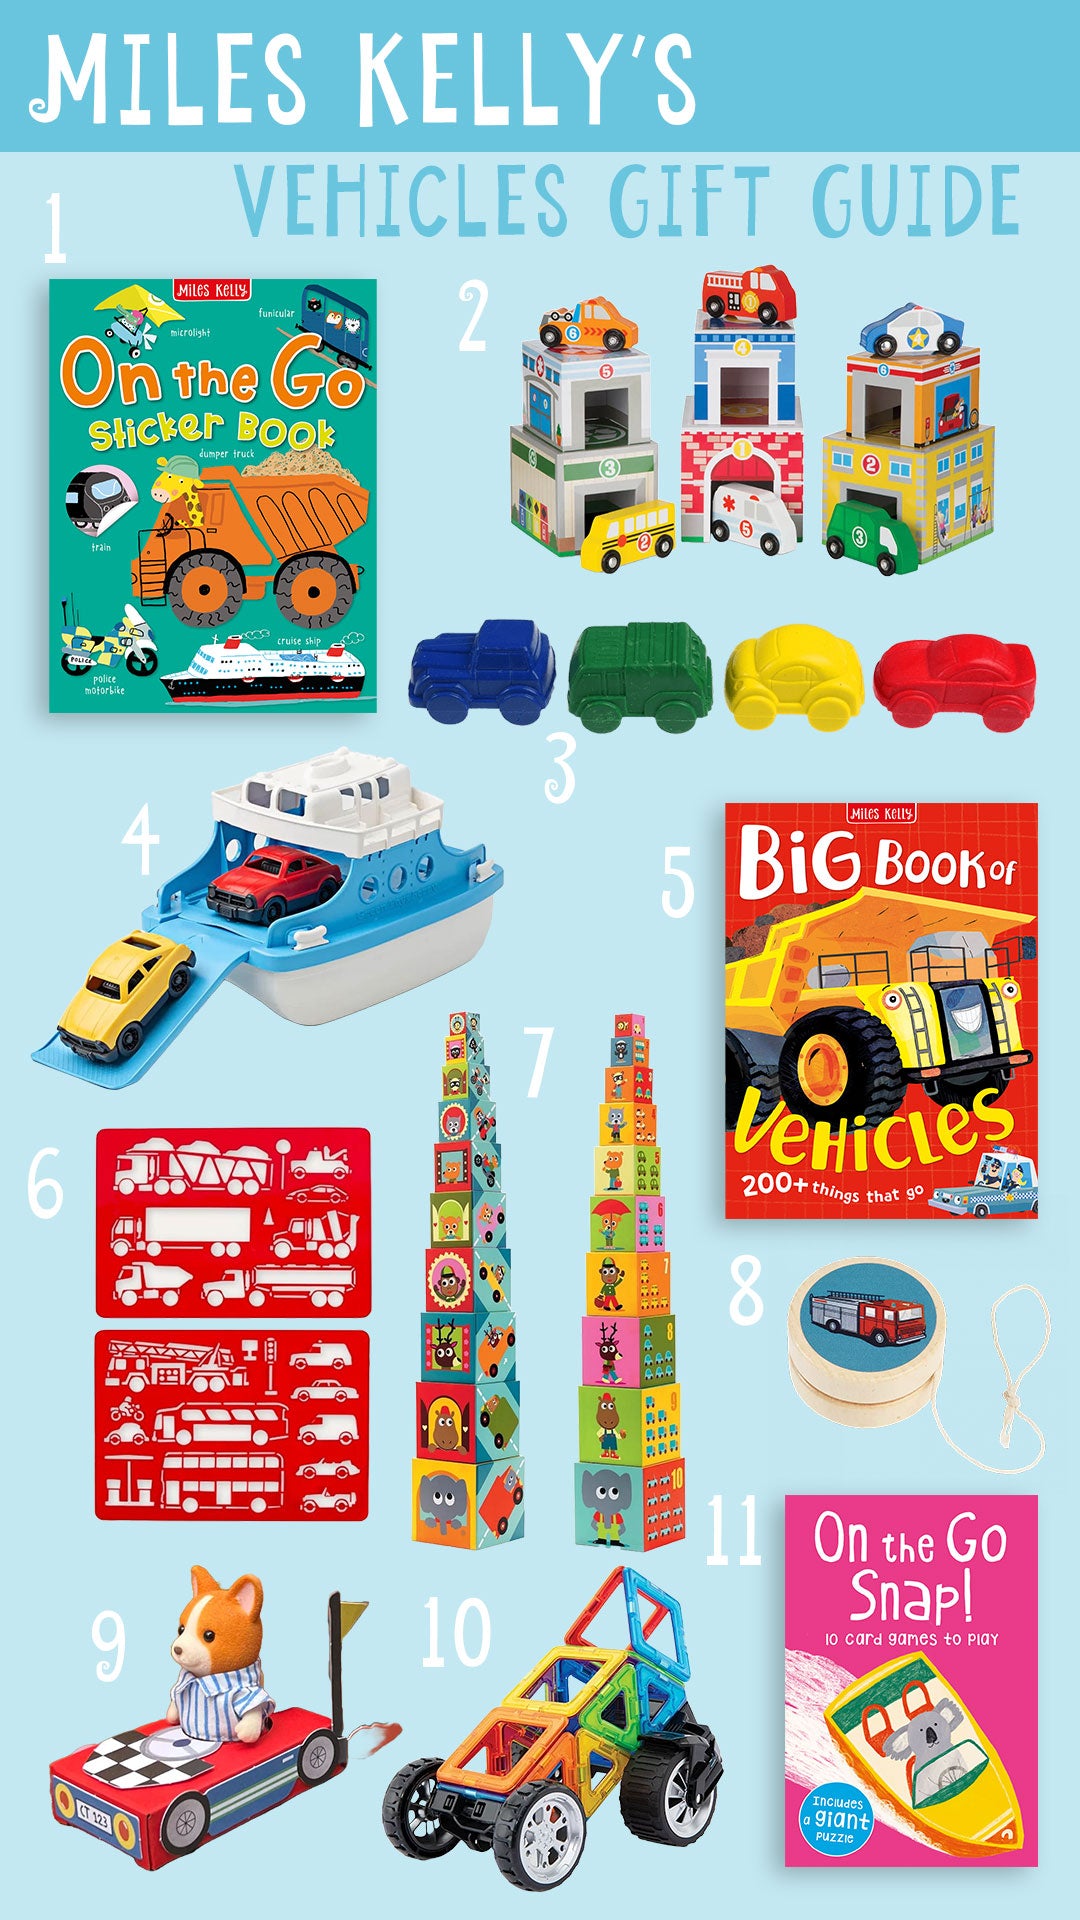 Vehicles books and toys for kids – Christmas gift guide – Miles Kelly